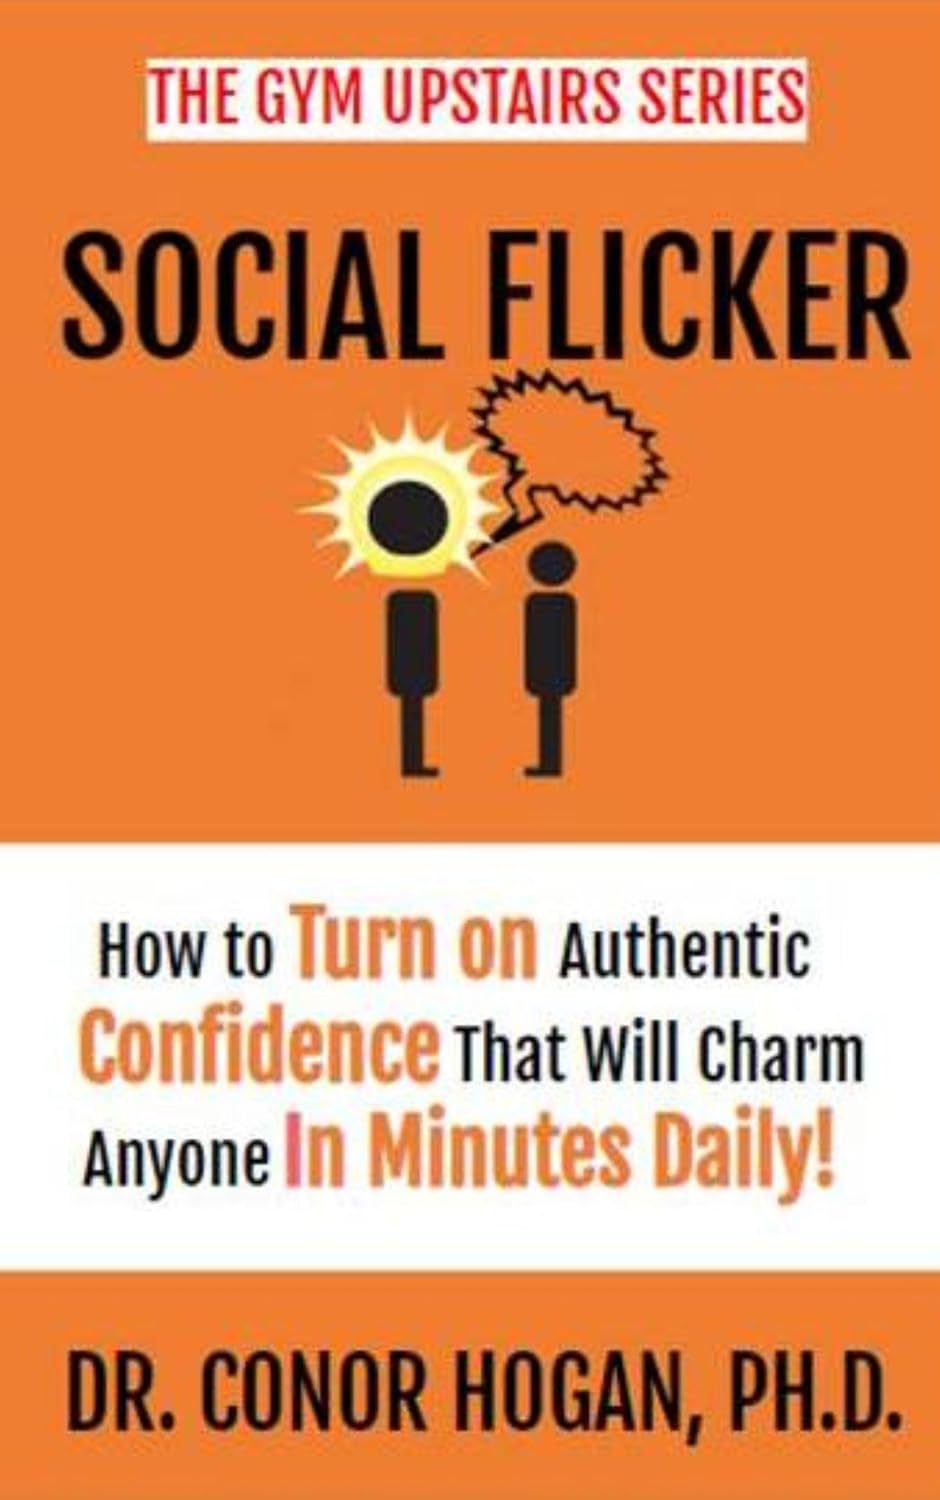 SOCIAL FLICKER: How to Turn on Authentic Confidence That Will Charm Anyone in Minutes Daily (The Gym Upstairs)